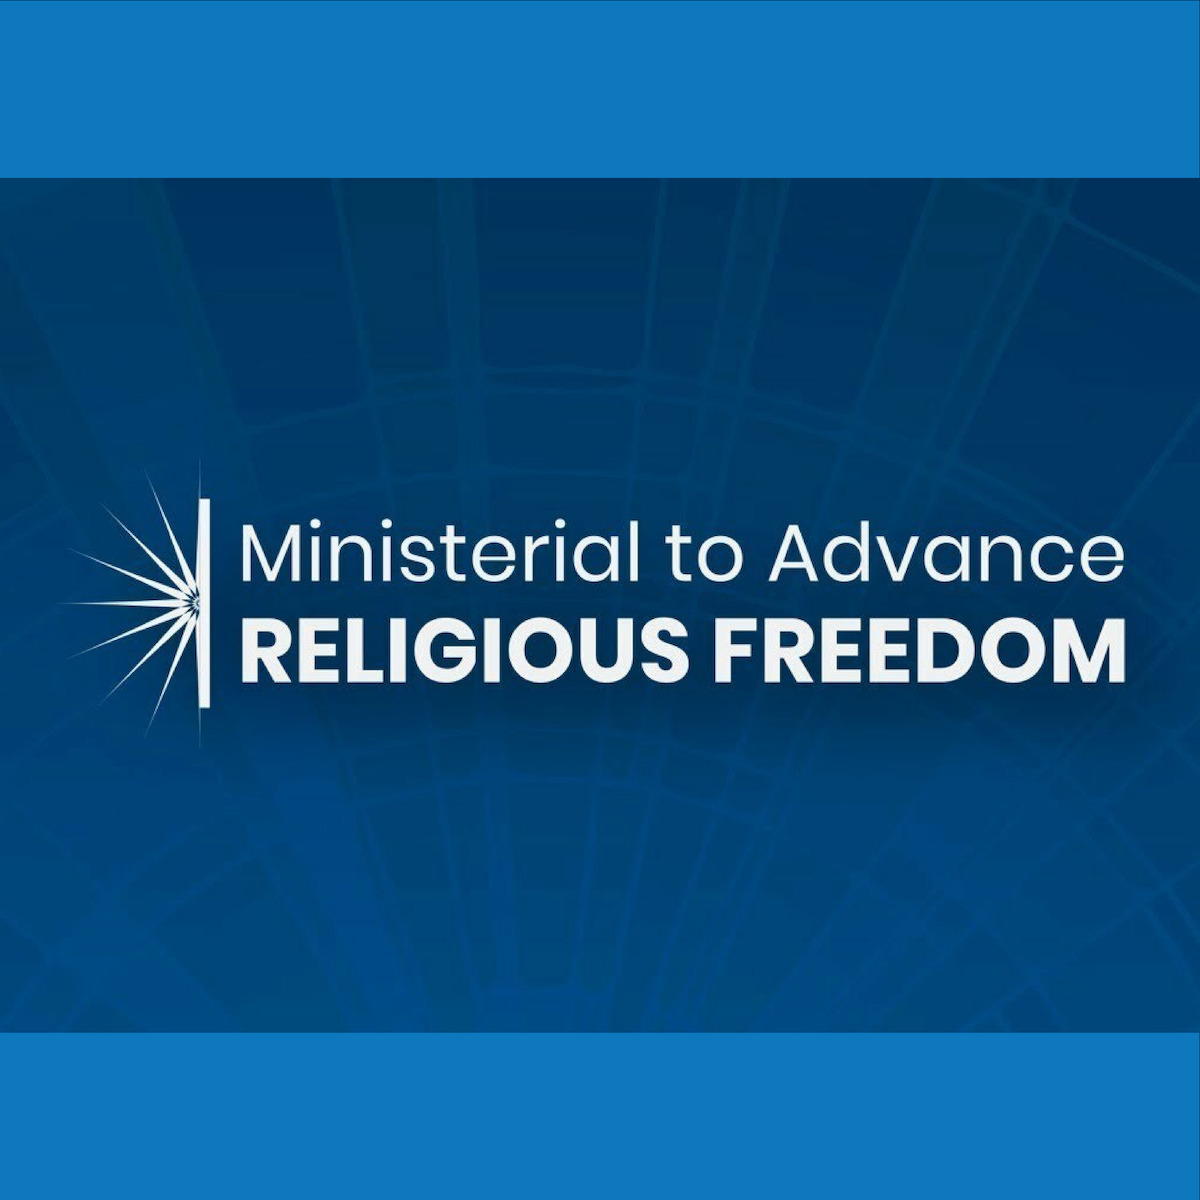 Global Peace Foundation | Ministerial to Advance Religious Freedom